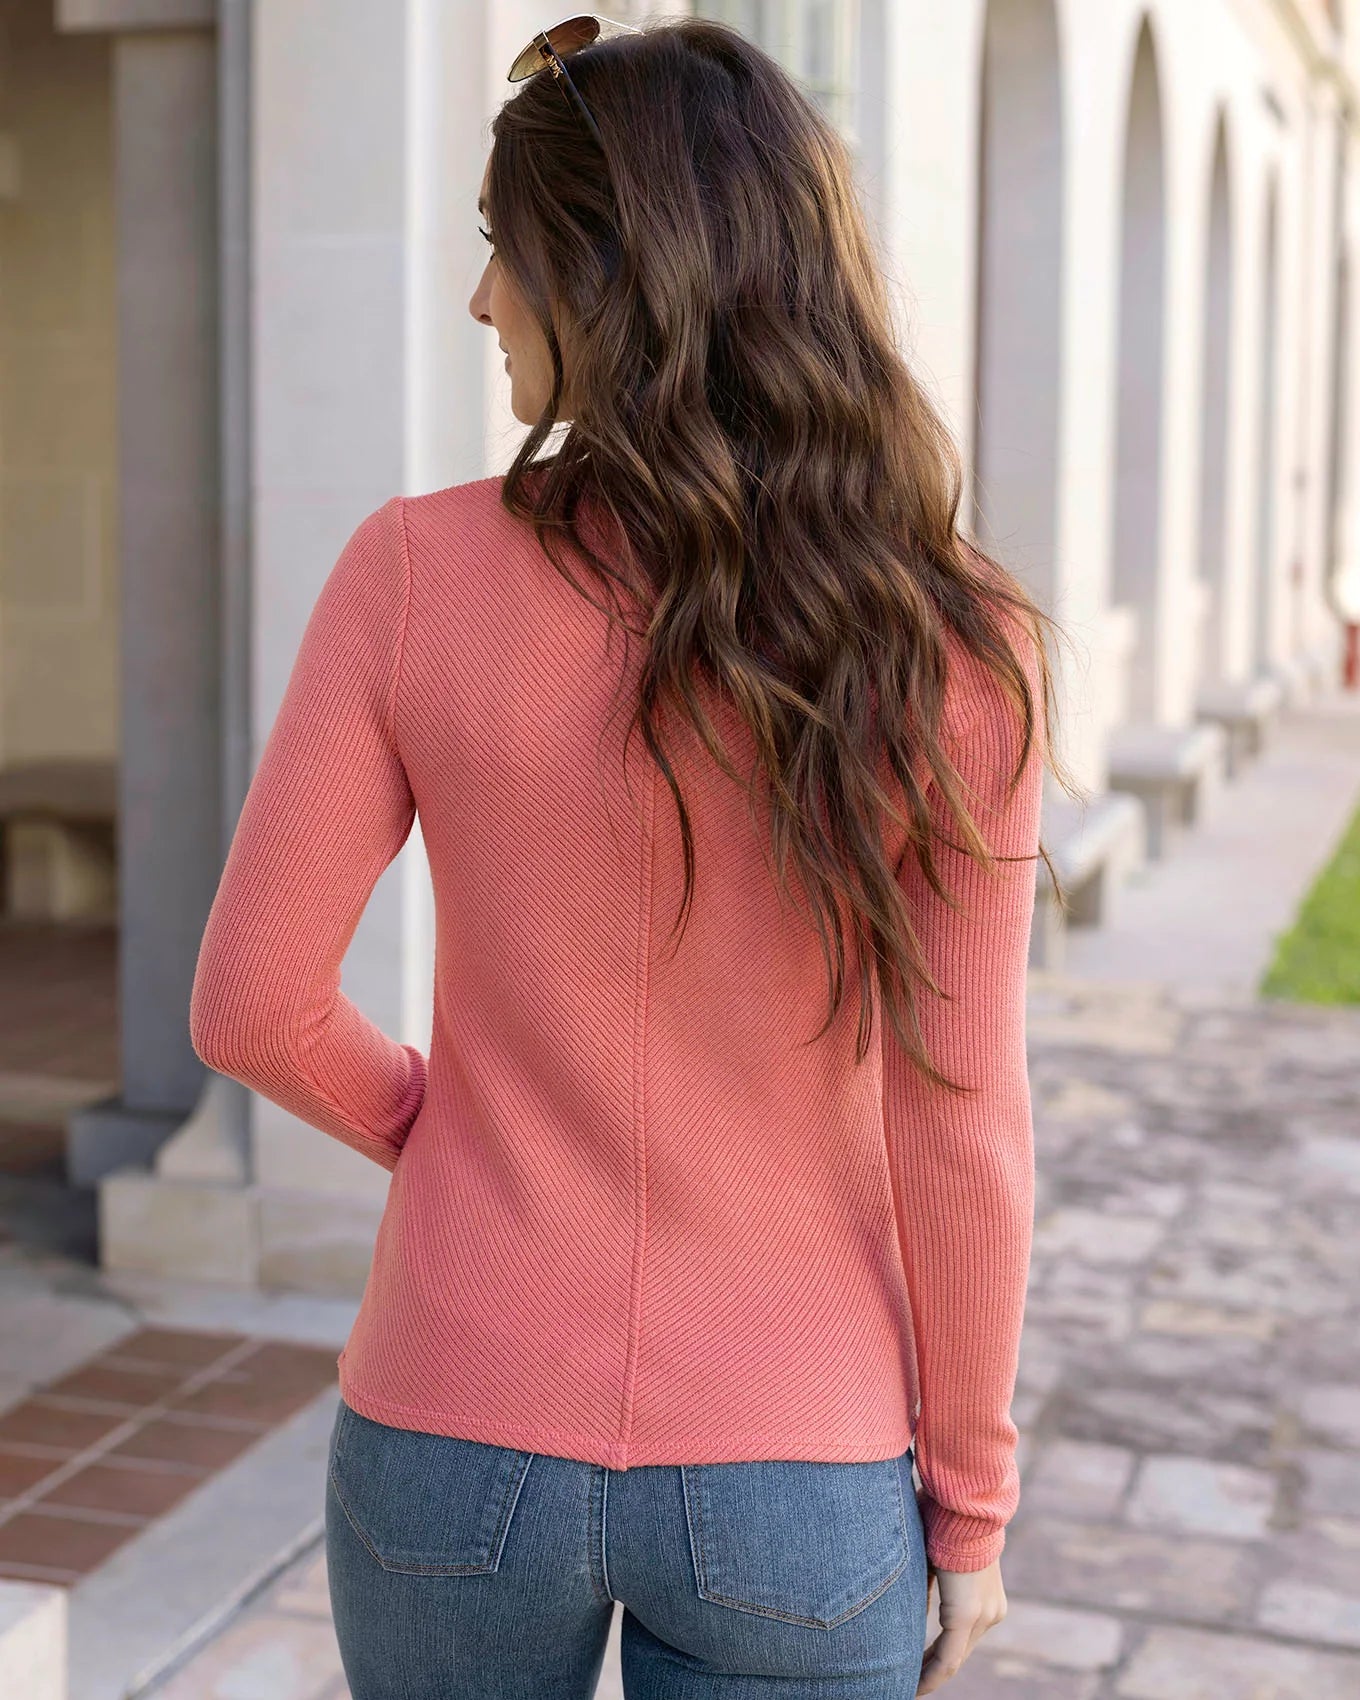 Lantana Bloom Chic Spring Ribbed Sweater by Grace & Lace (Ships in 1-2 Weeks)